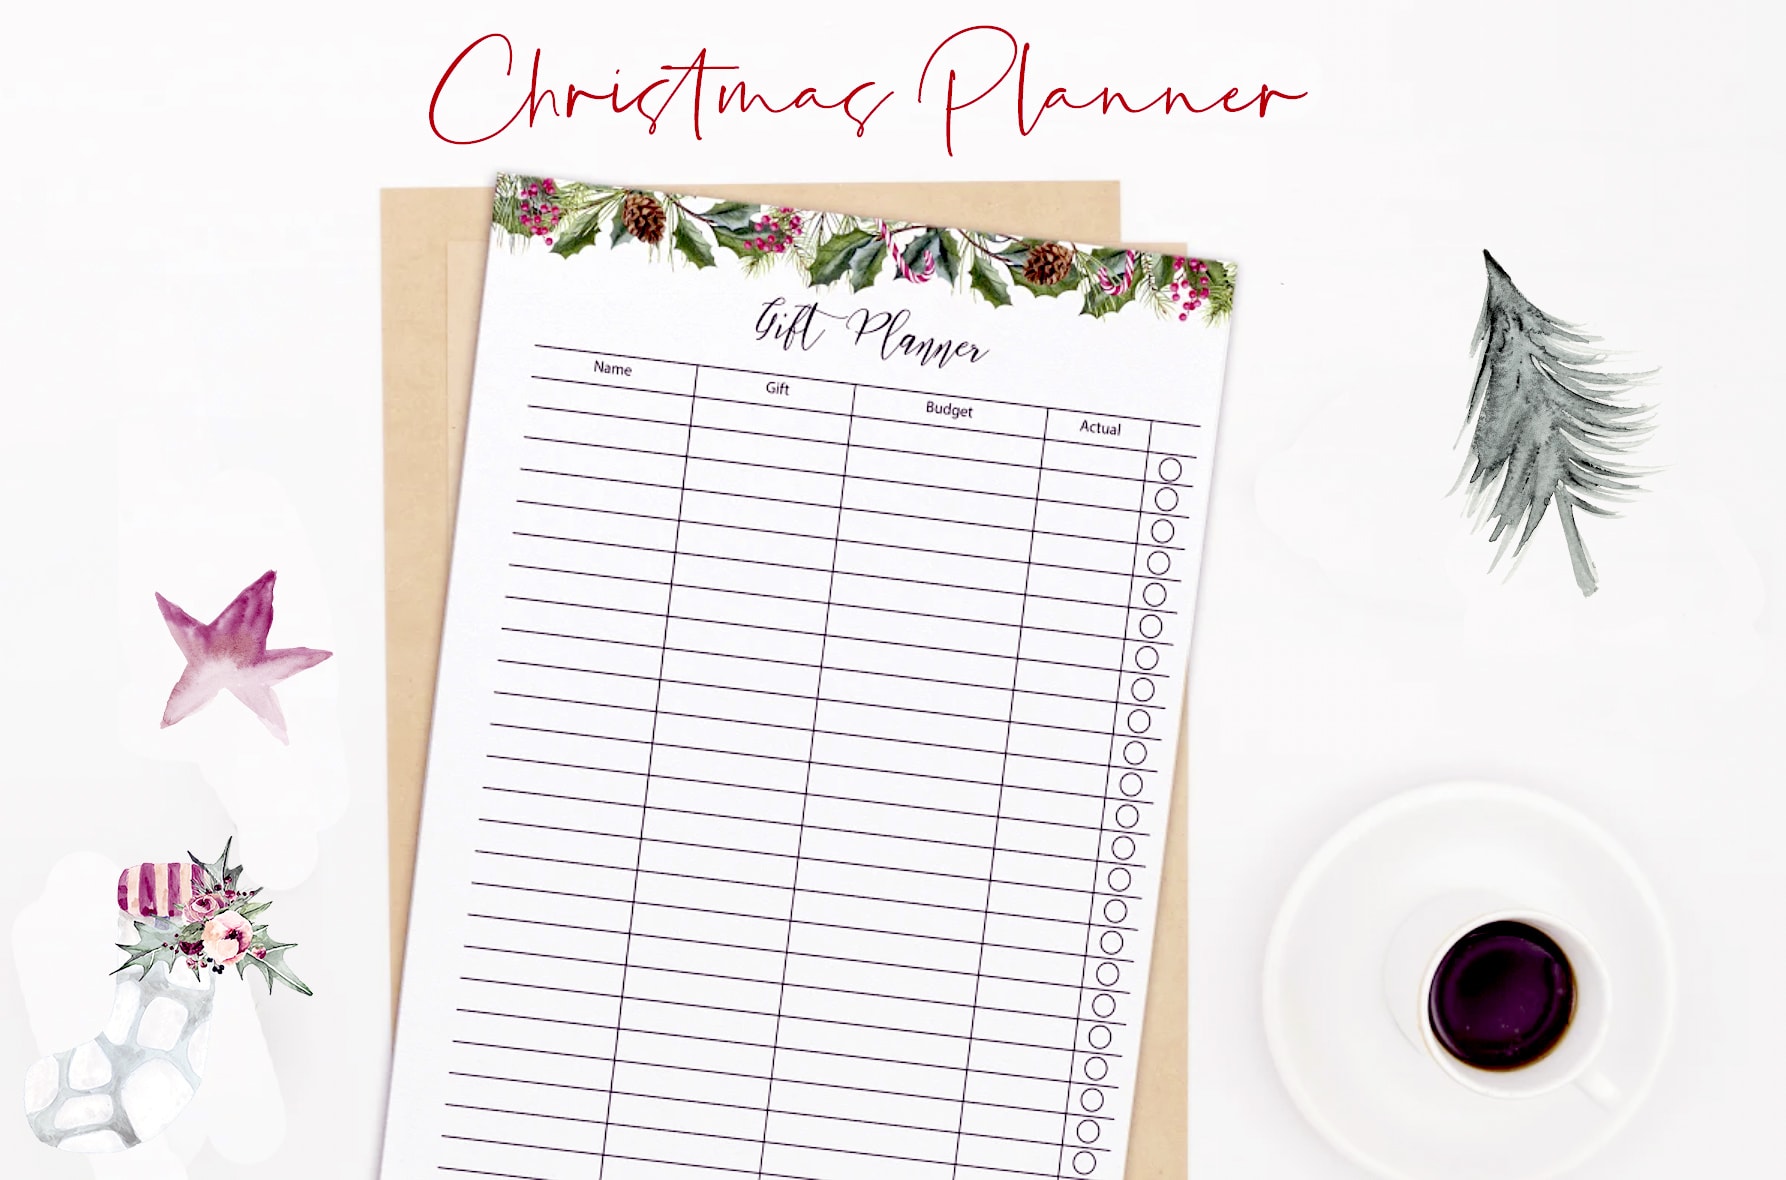 Holiday Planning Made Easy – All NEW 24 Page Free Printable Guide!